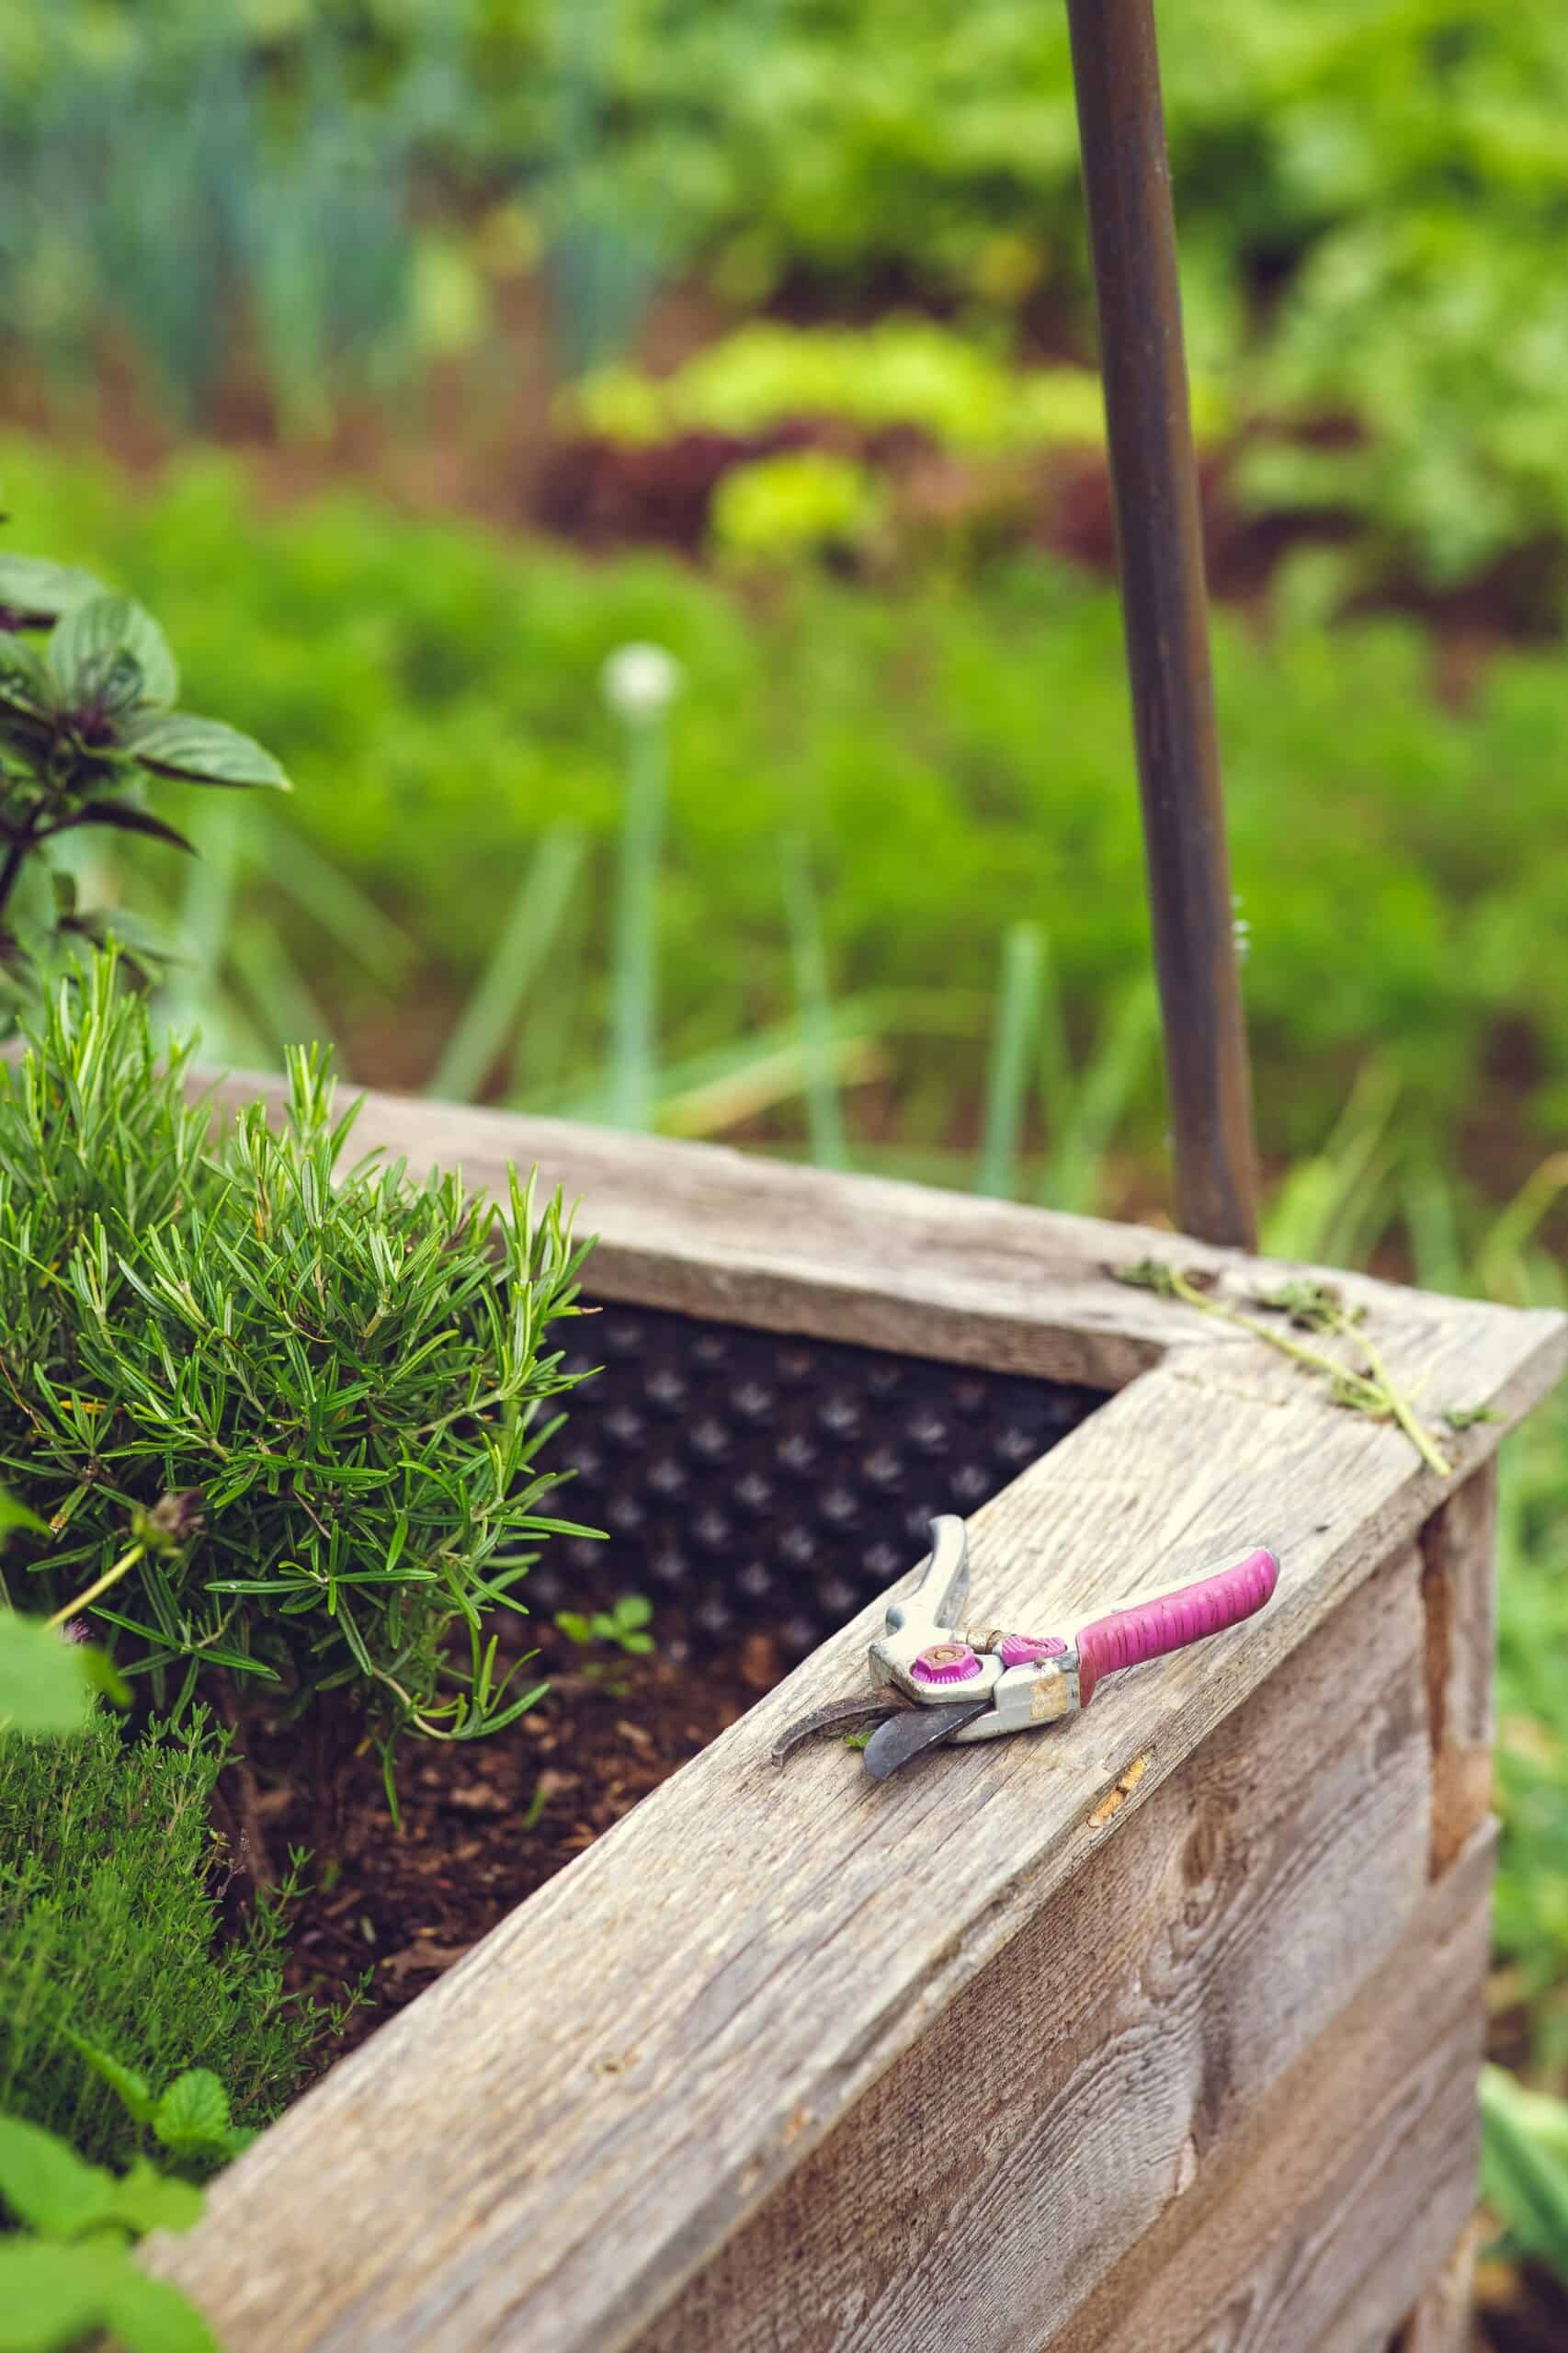 10 Essential Tips for Starting Your Own Garden